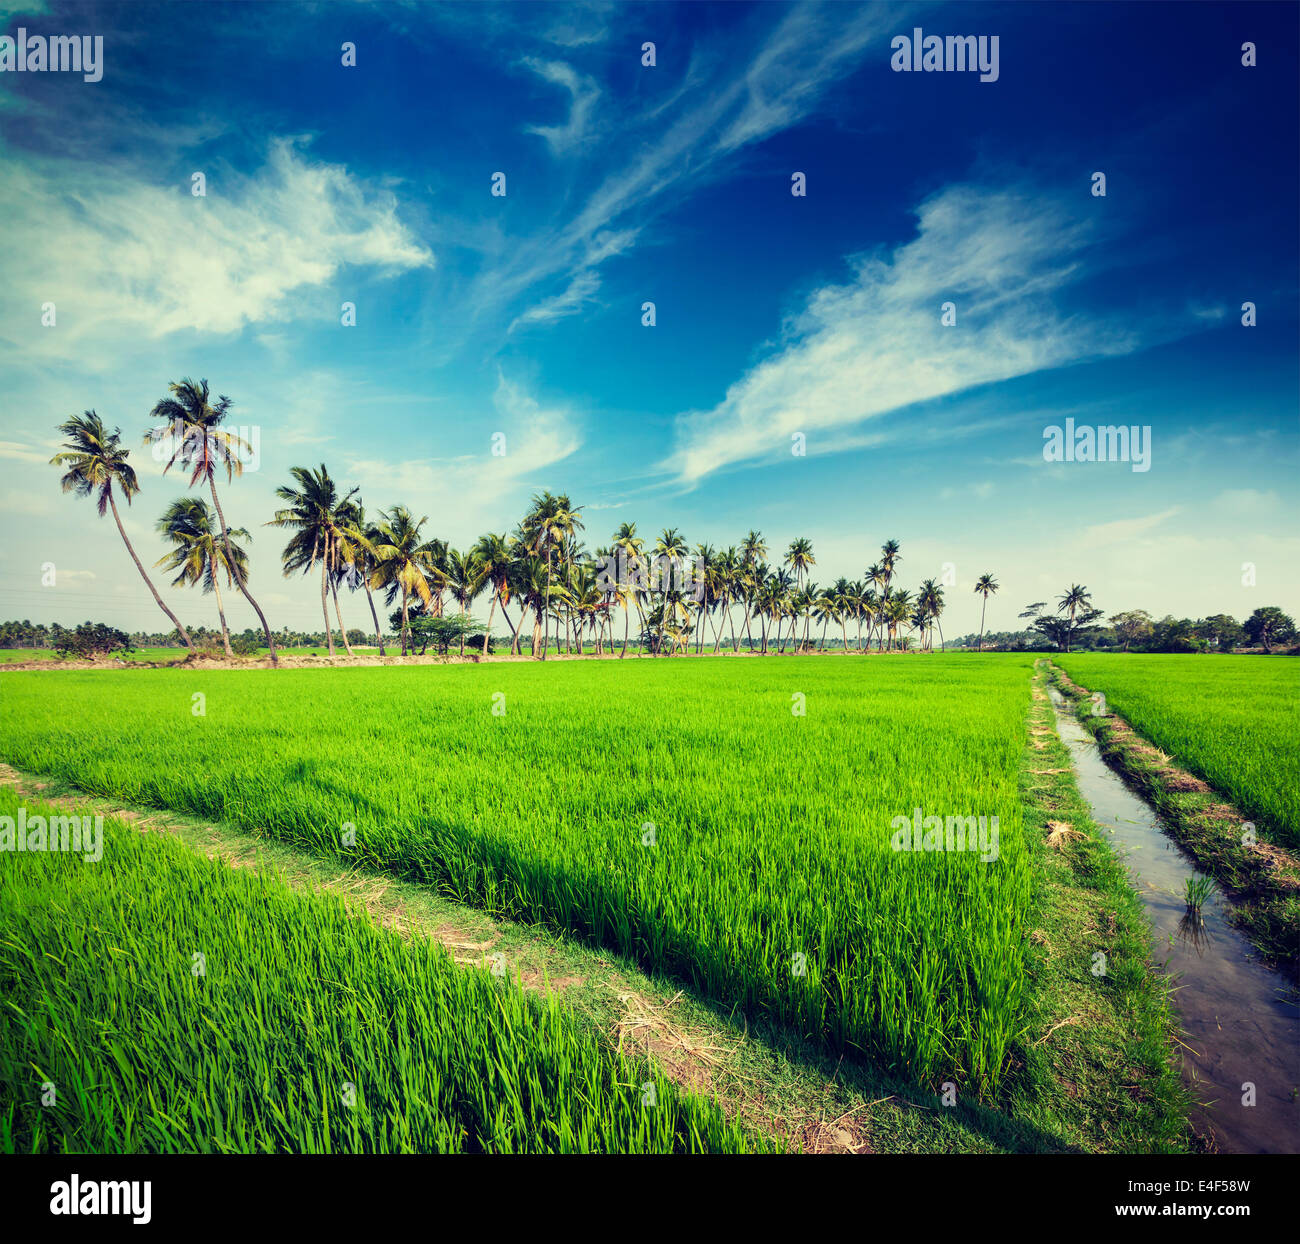 Vintage retro hipster style travel image of rural Indian scene - rice paddy field and palms. Tamil Nadu, India Stock Photo